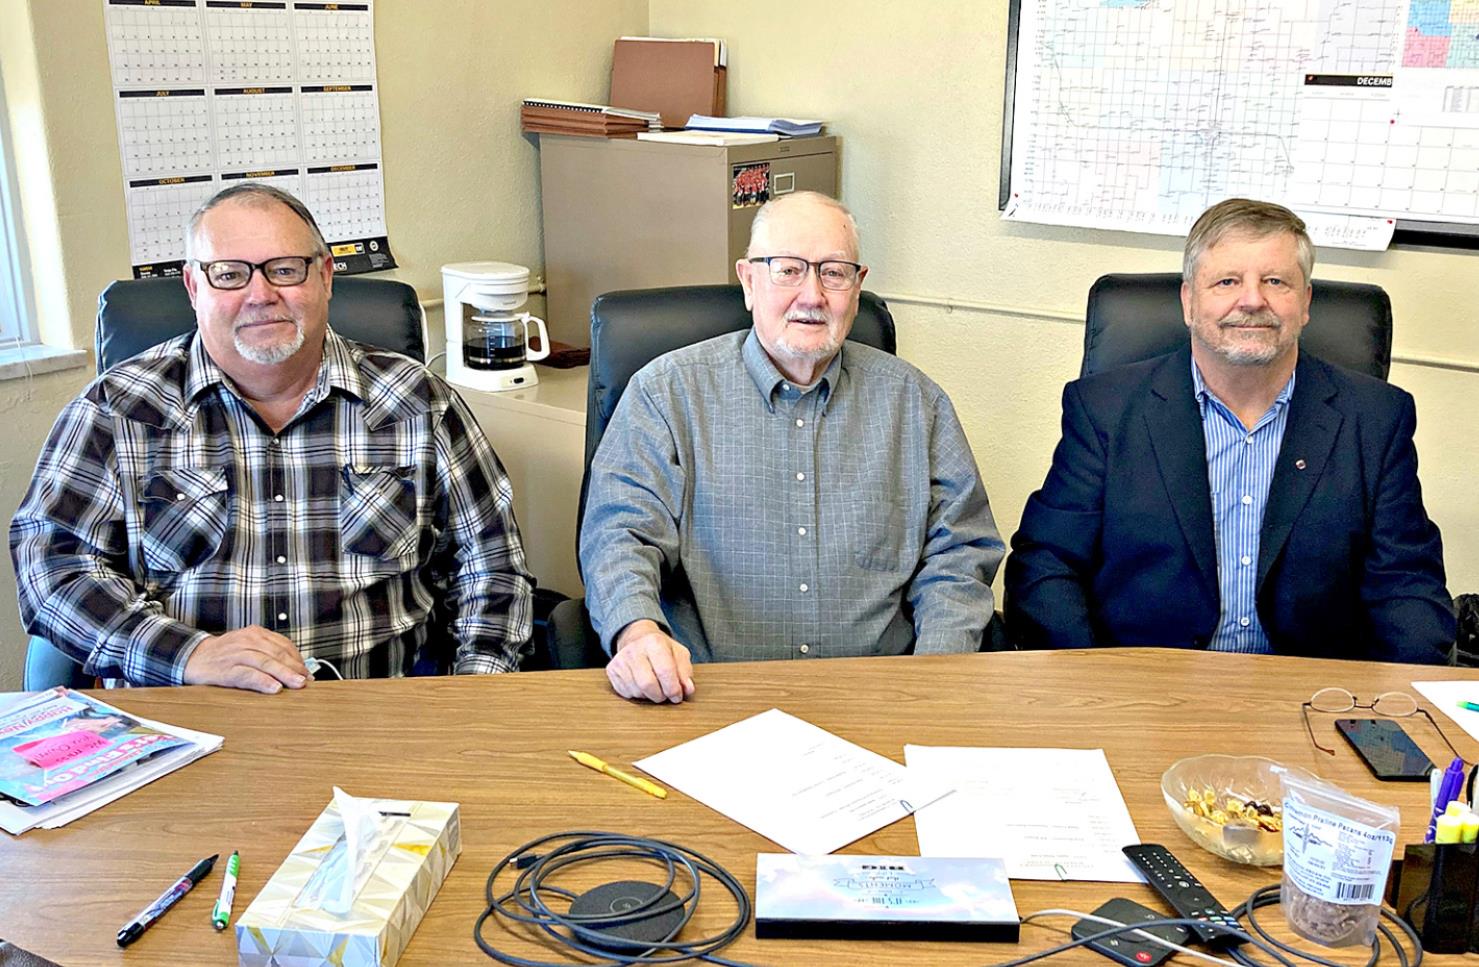 THE NEW ROOKS COUNTY COMMISSION held its first meeting of the year on Monday, January 11th after commissioner Tim Berland was sworn in to office at the start of the morning session. Pictured are Tim Berland, Greg Balthazor and John Ruder. (Photo courtesy of Roger Hrabe.)